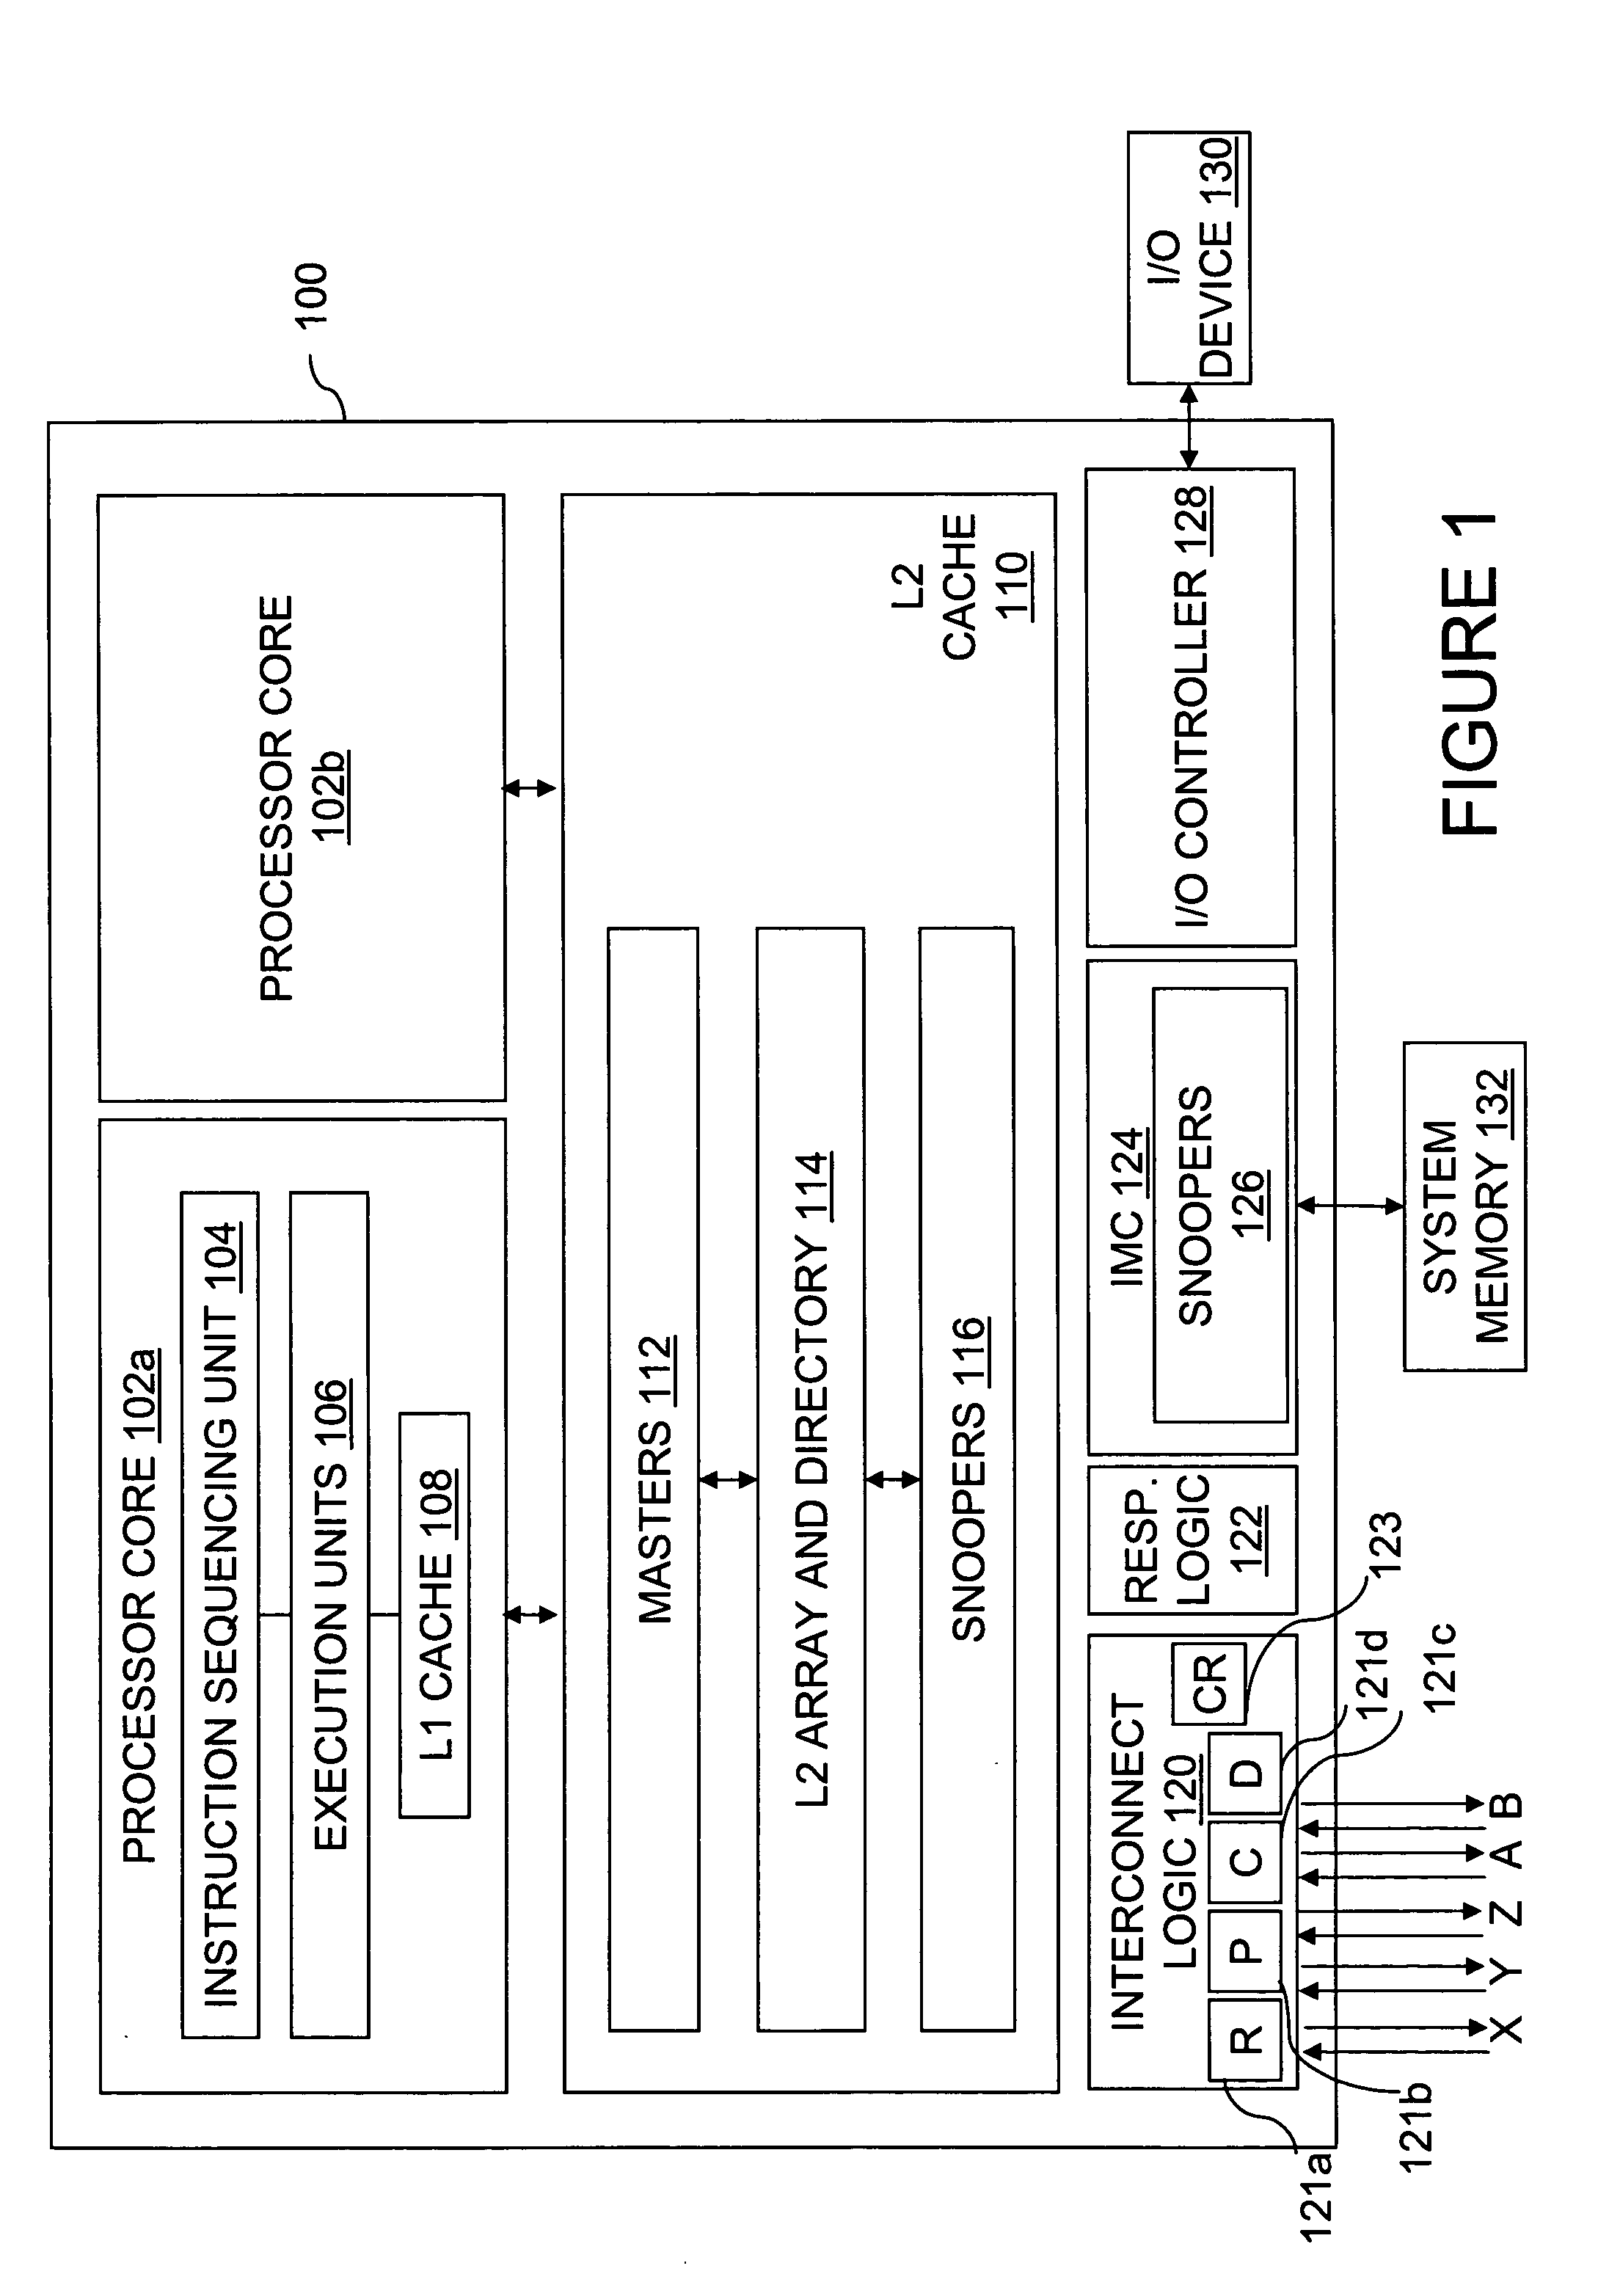 Data processing system, method and interconnect fabric supporting destination data tagging